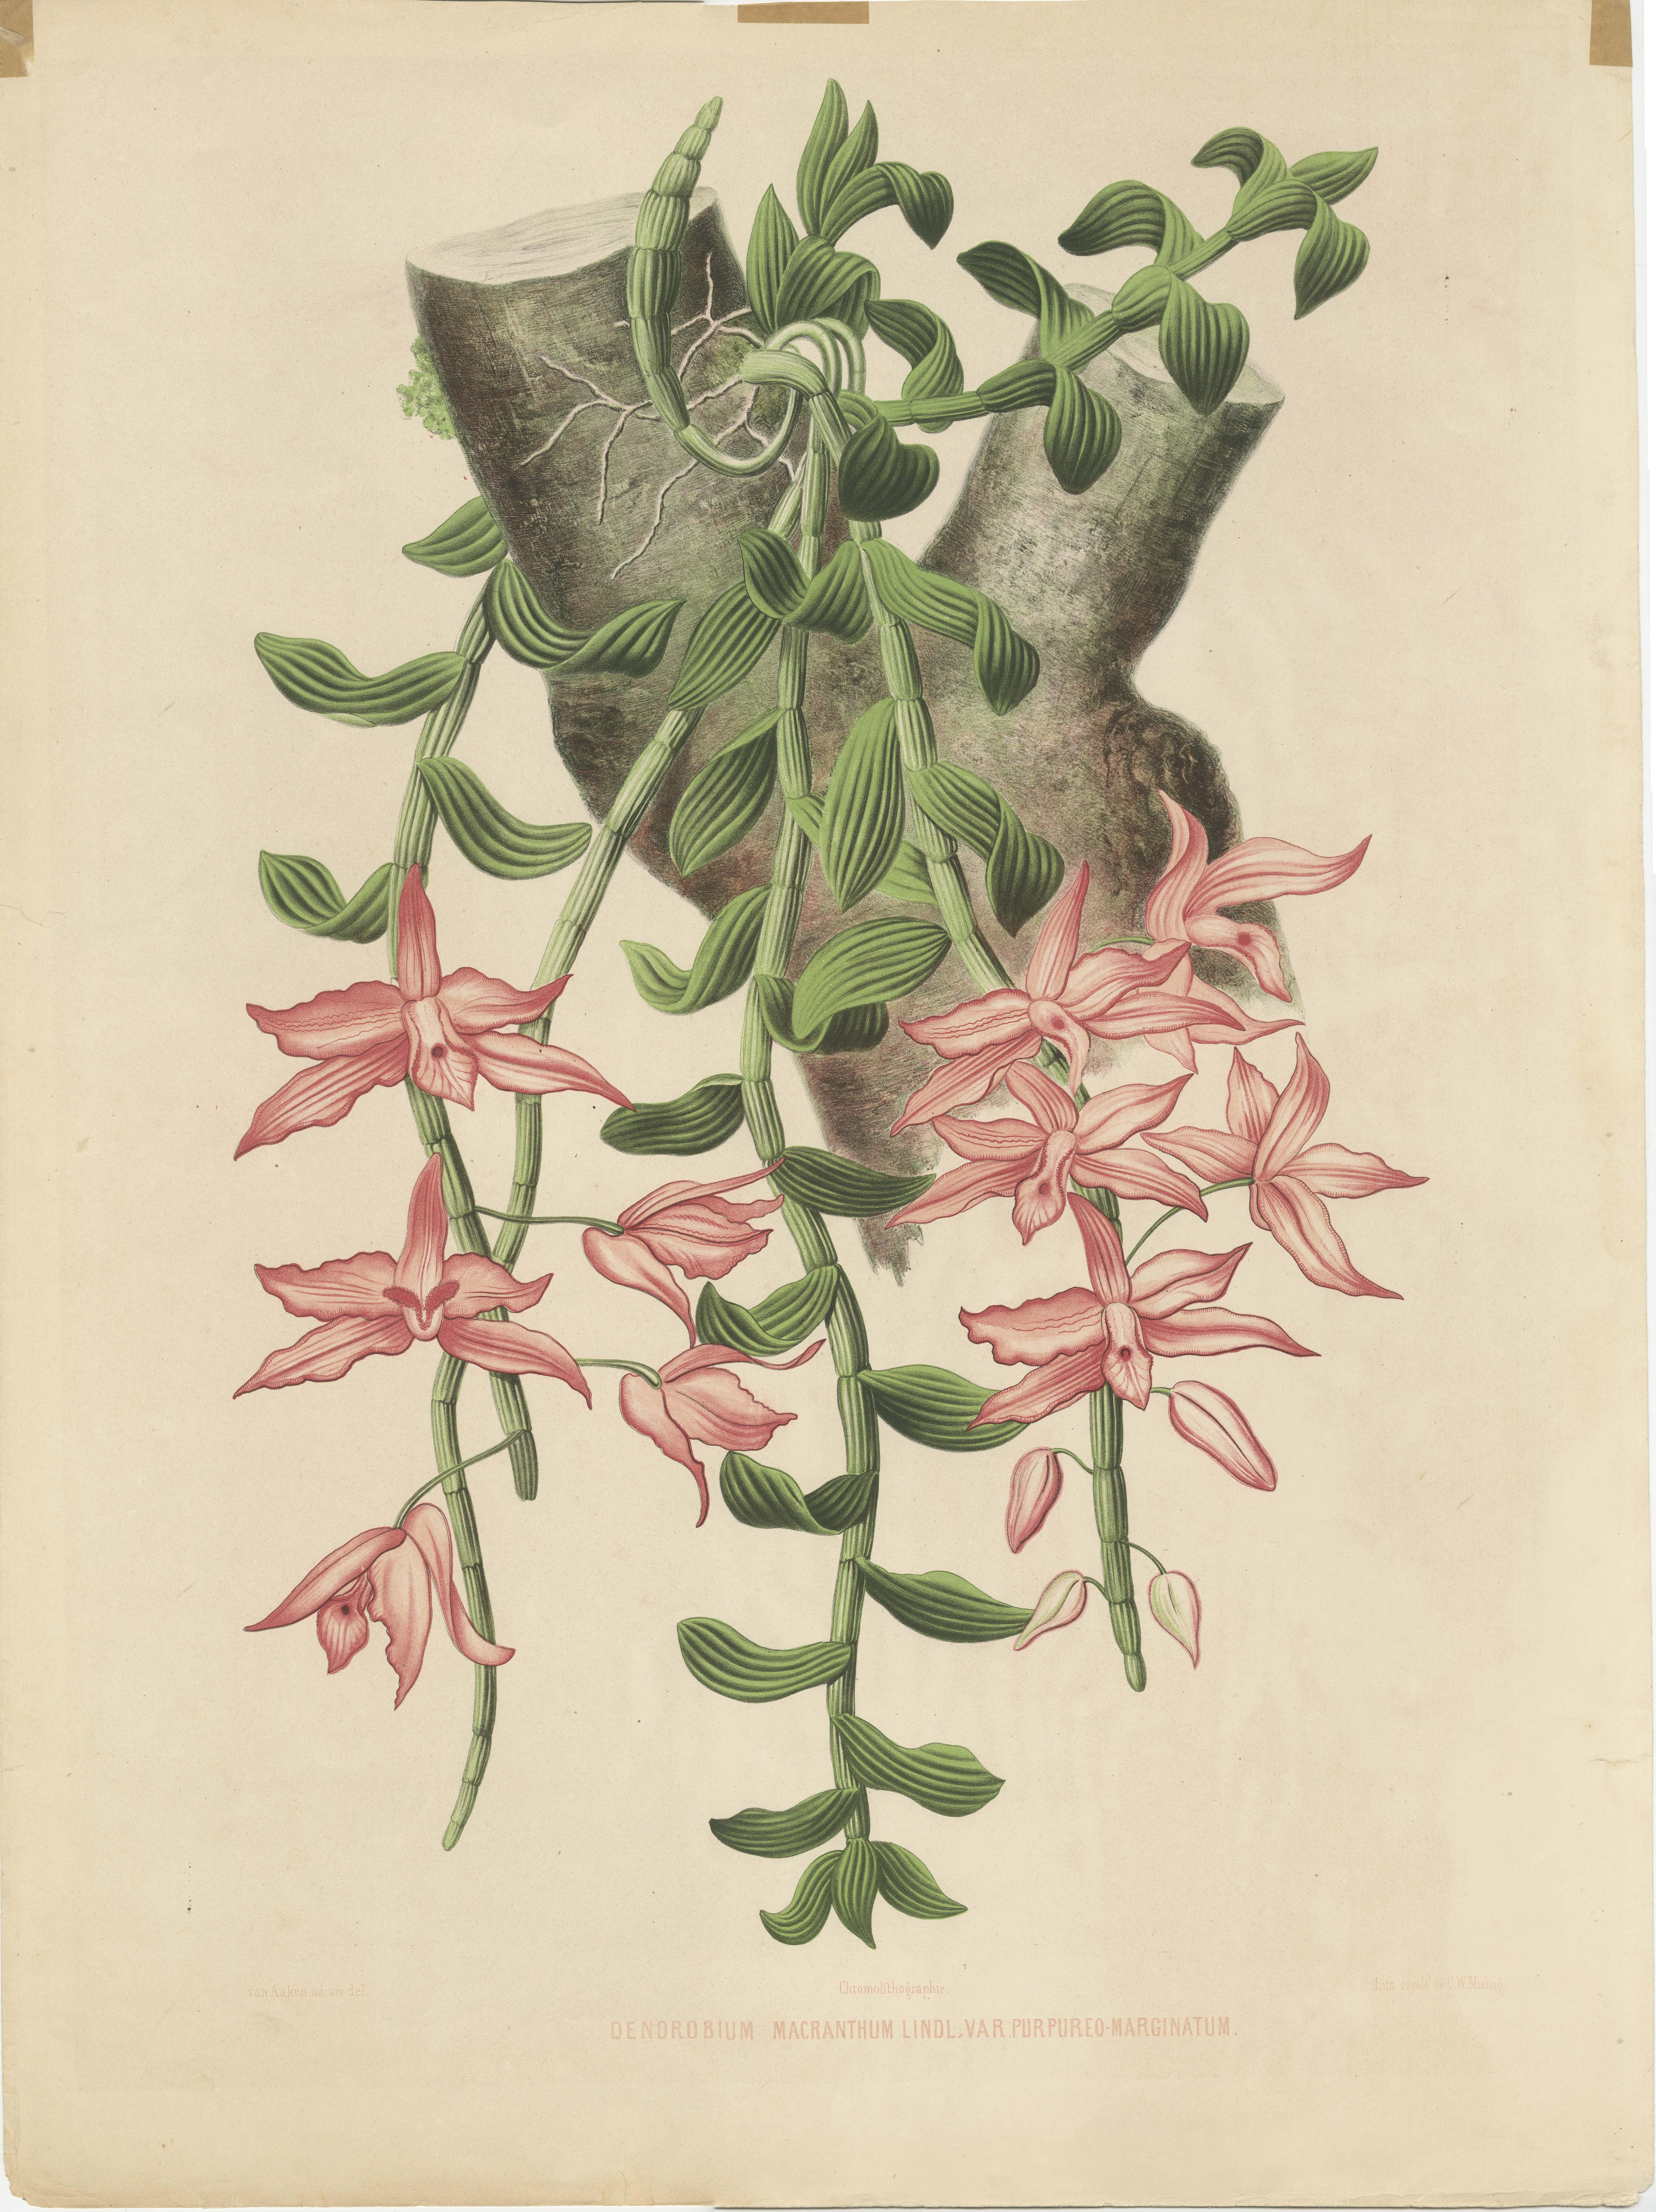 A very large chromolithograph of the orchid species Dendrobium macranthum, as indicated by the text at the bottom of the print. It is from a collection called, 